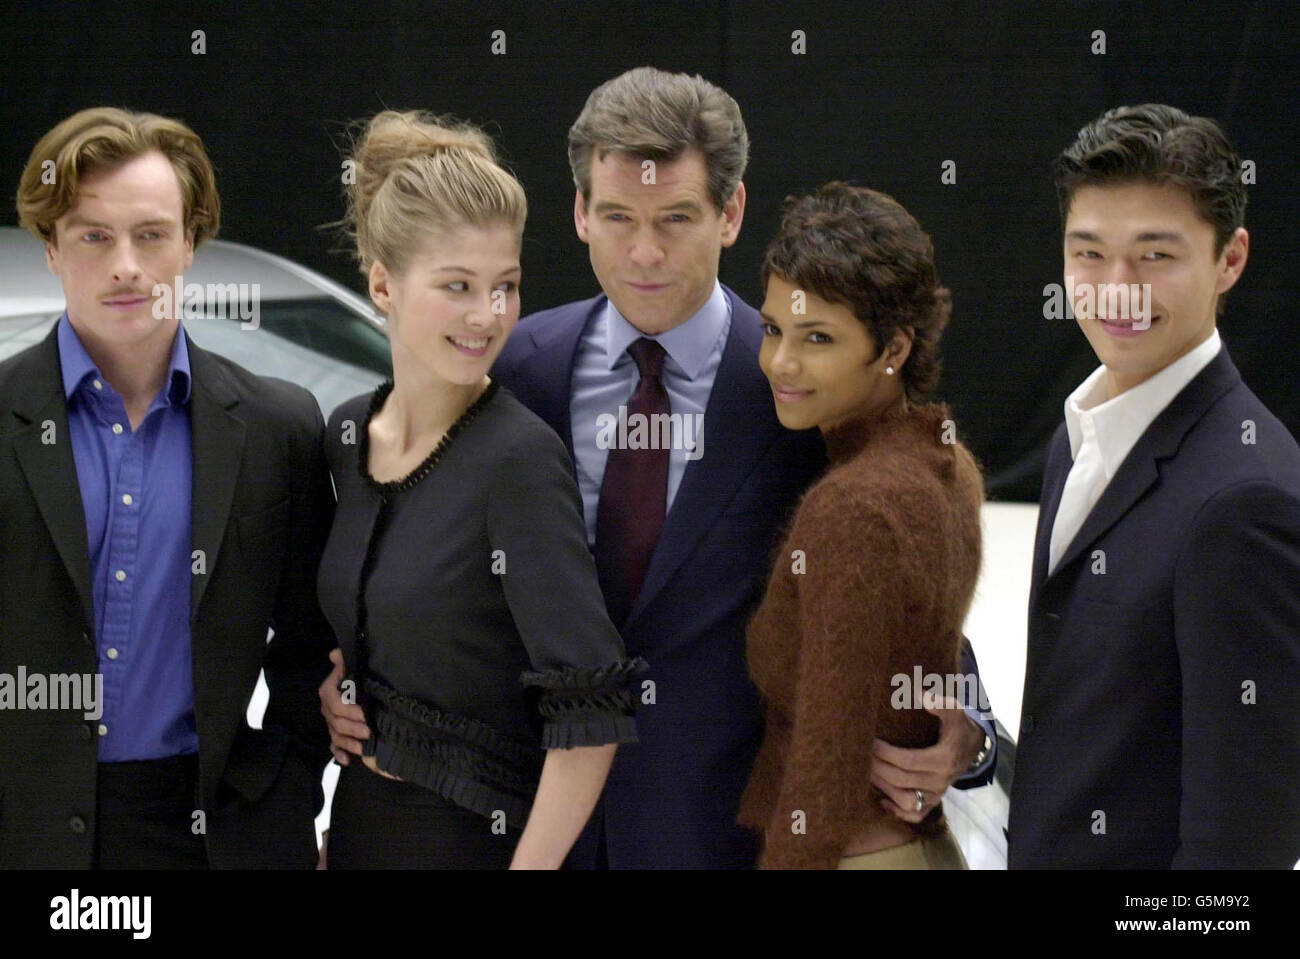 Stars of the film, Toby Stephens, Rosamund Pike, Pierce Brosnan, Halle Berry and Rick Yune during a photocall at Pinewood Studios, north of London for 'Bond 20', the working title for the latest film which starts production next week. Stock Photo